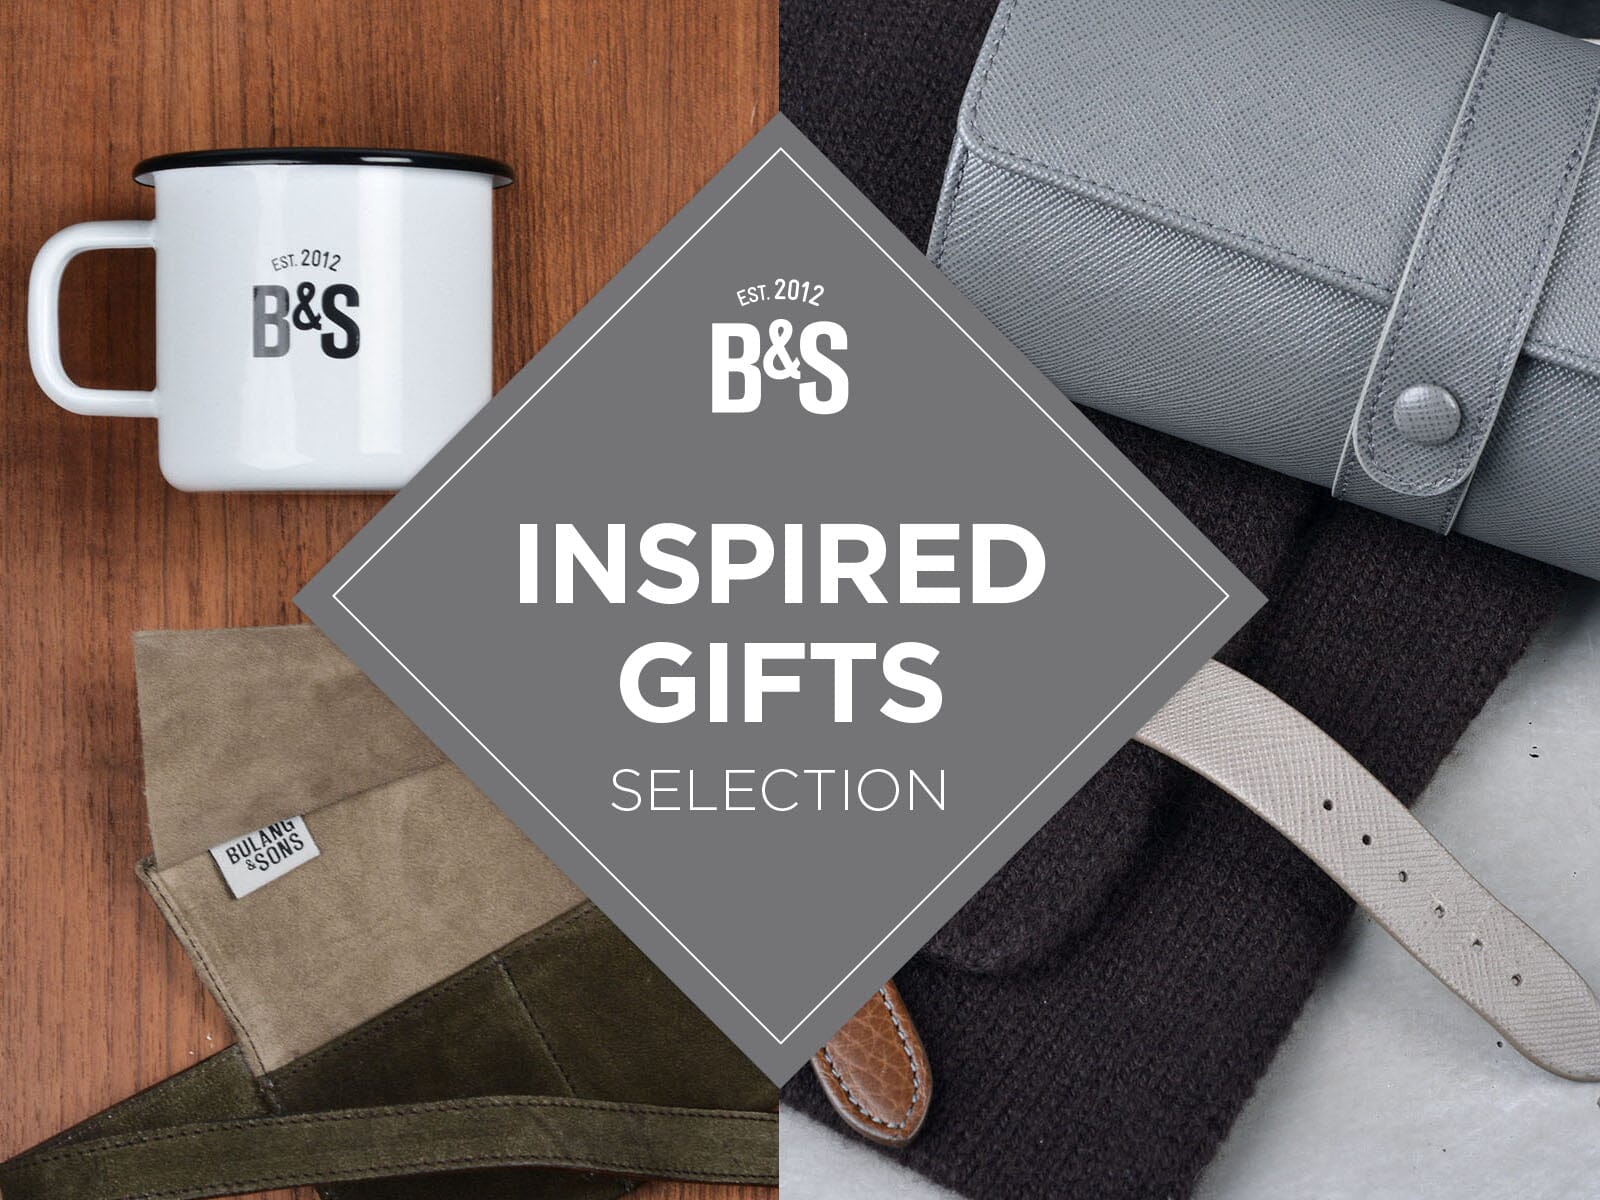 B&S Inspired Gifts